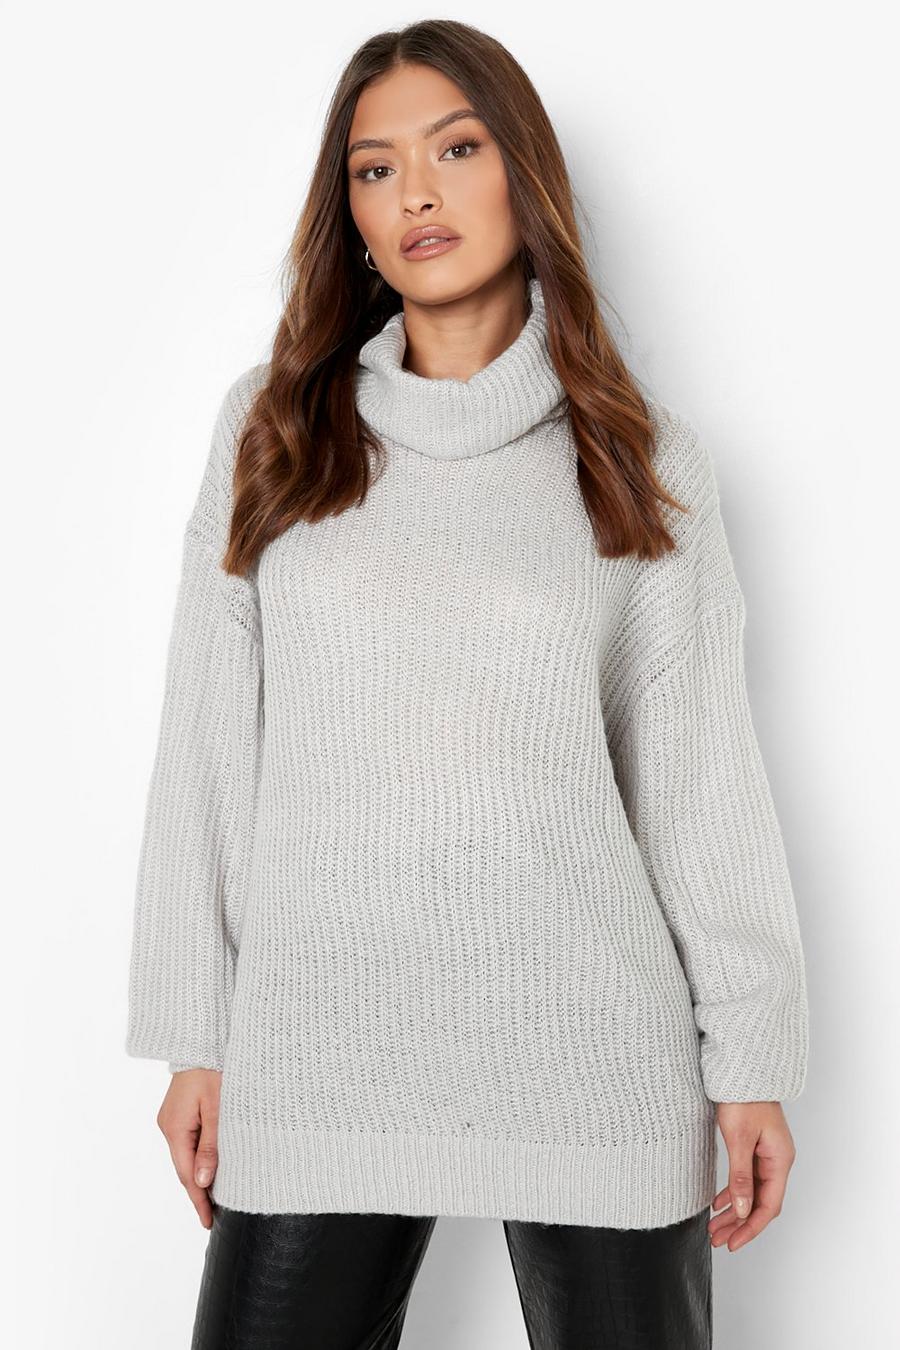 Silver grey Oversized Turtleneck Rib Knitted Sweater